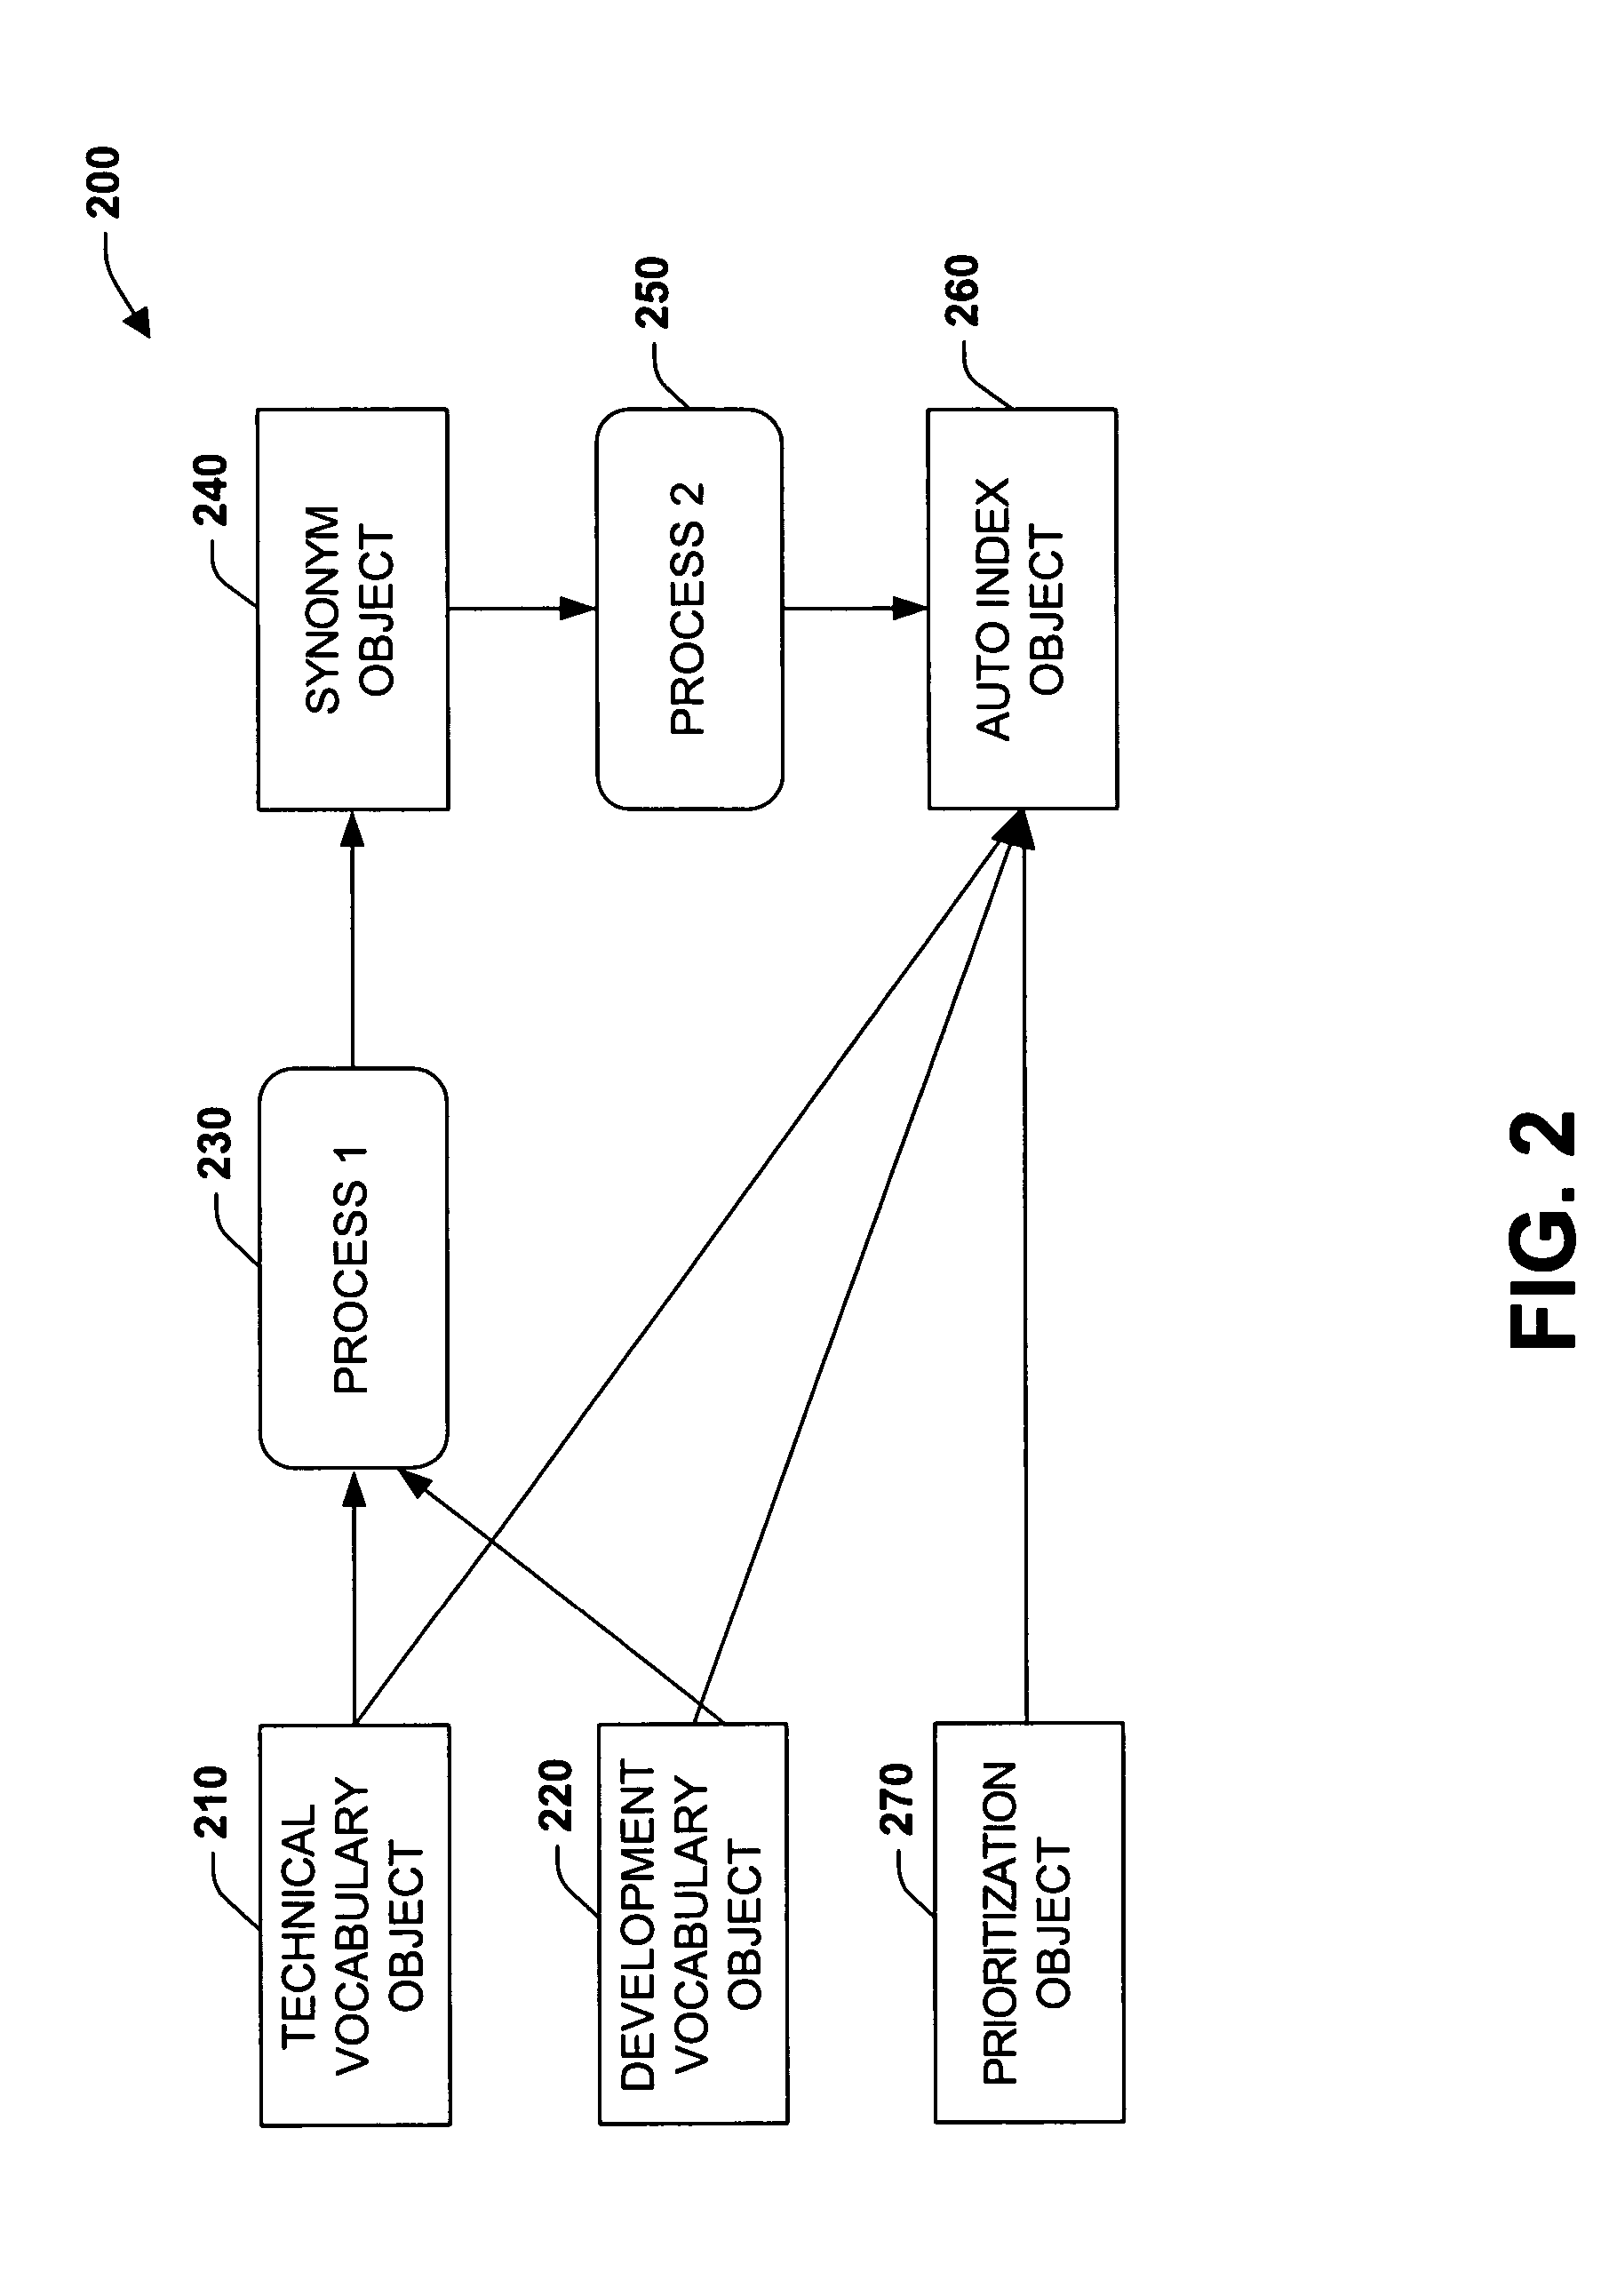 Systems and methods for improving information discovery